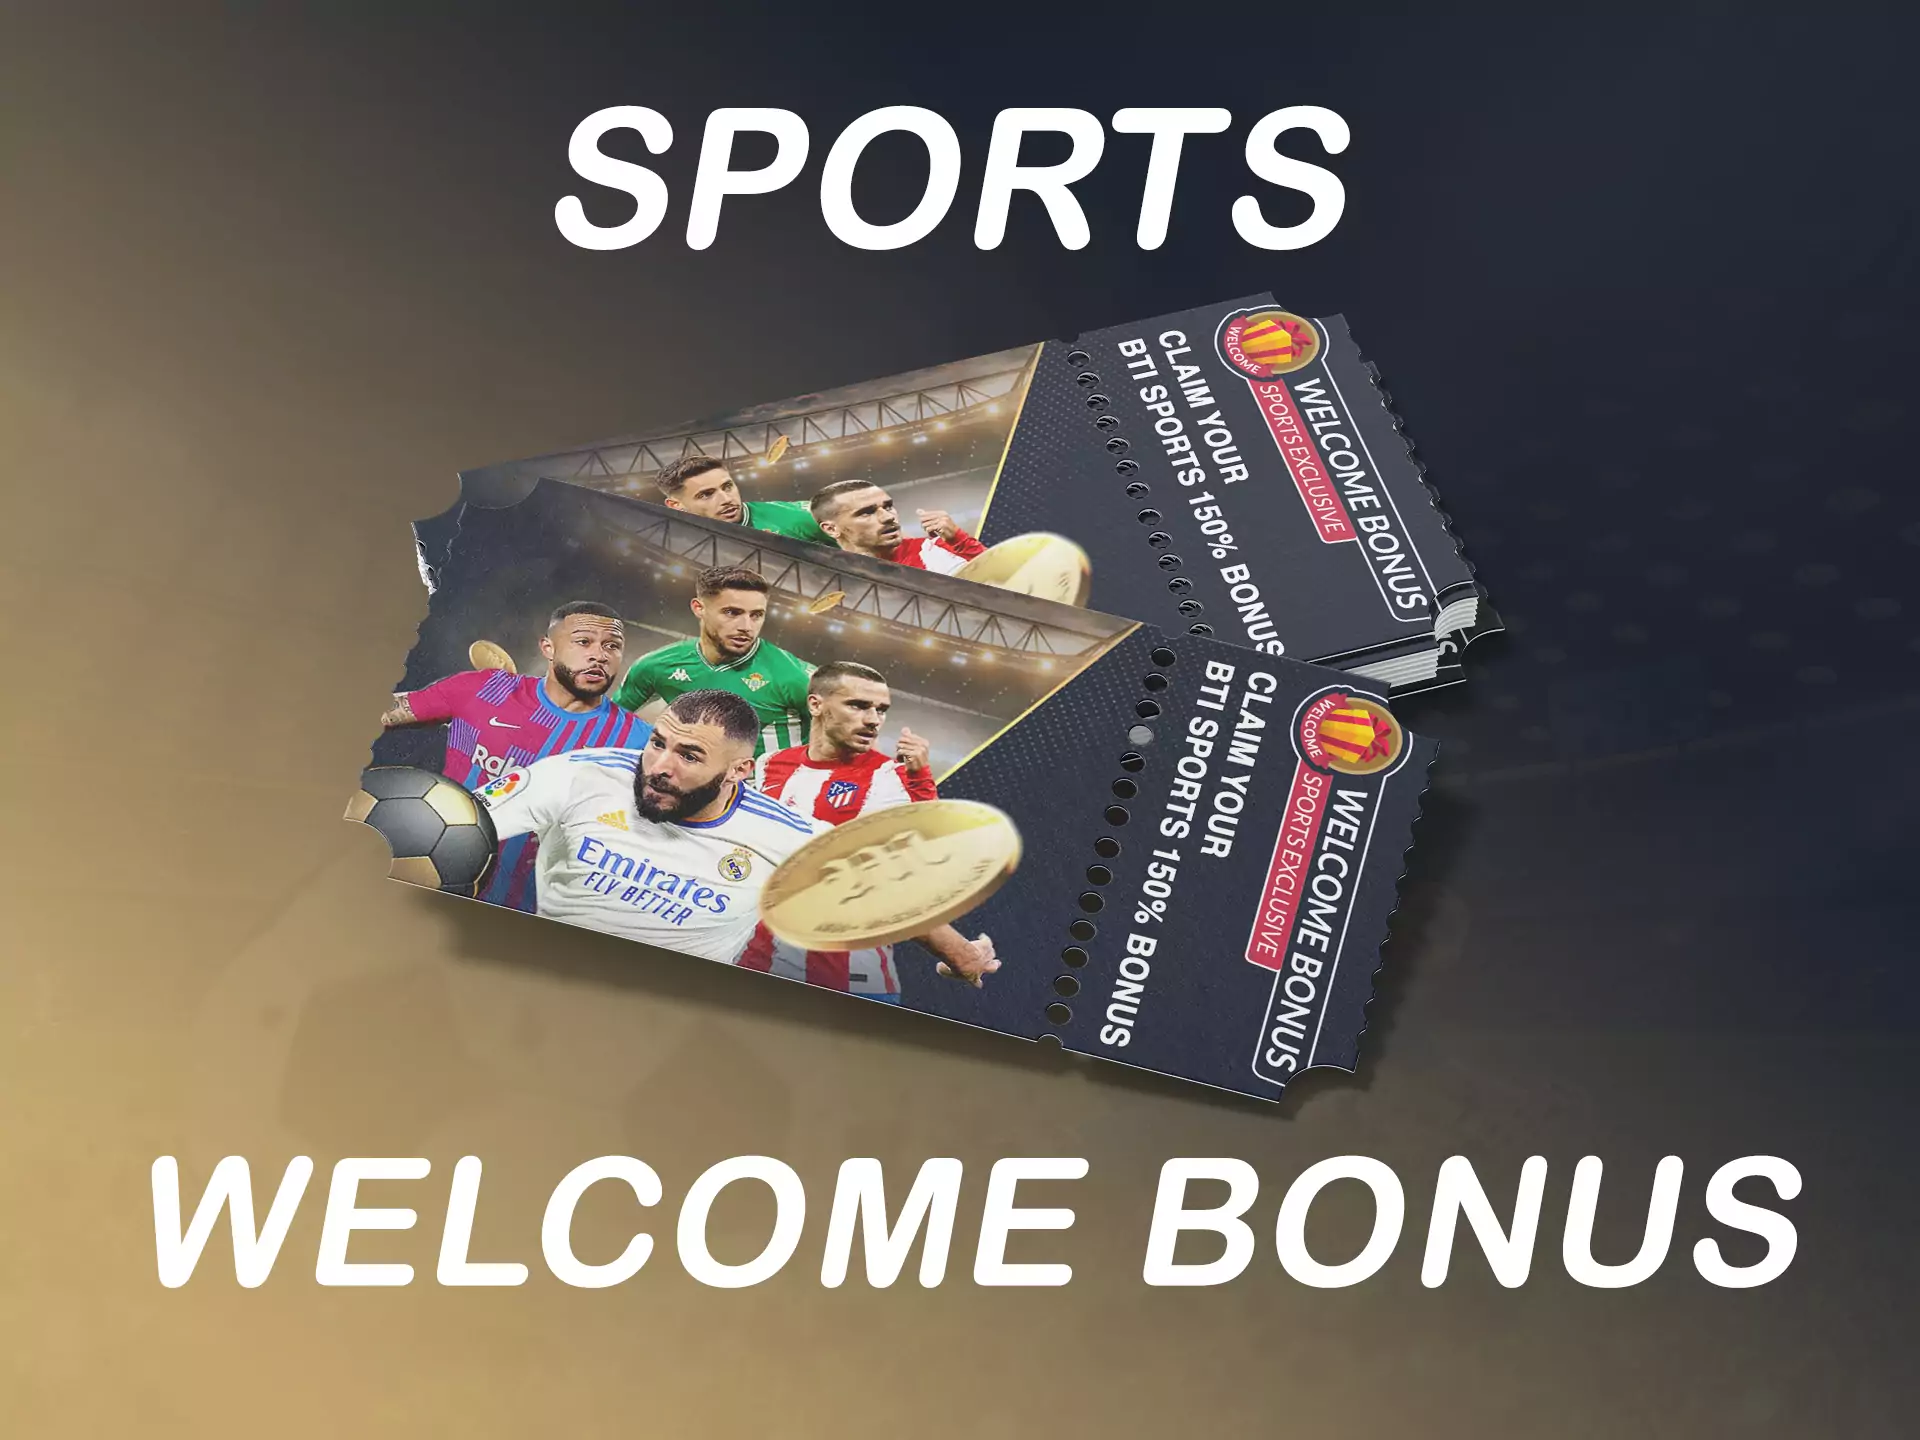 Sports fans get the welcome bonus on betting at M88.